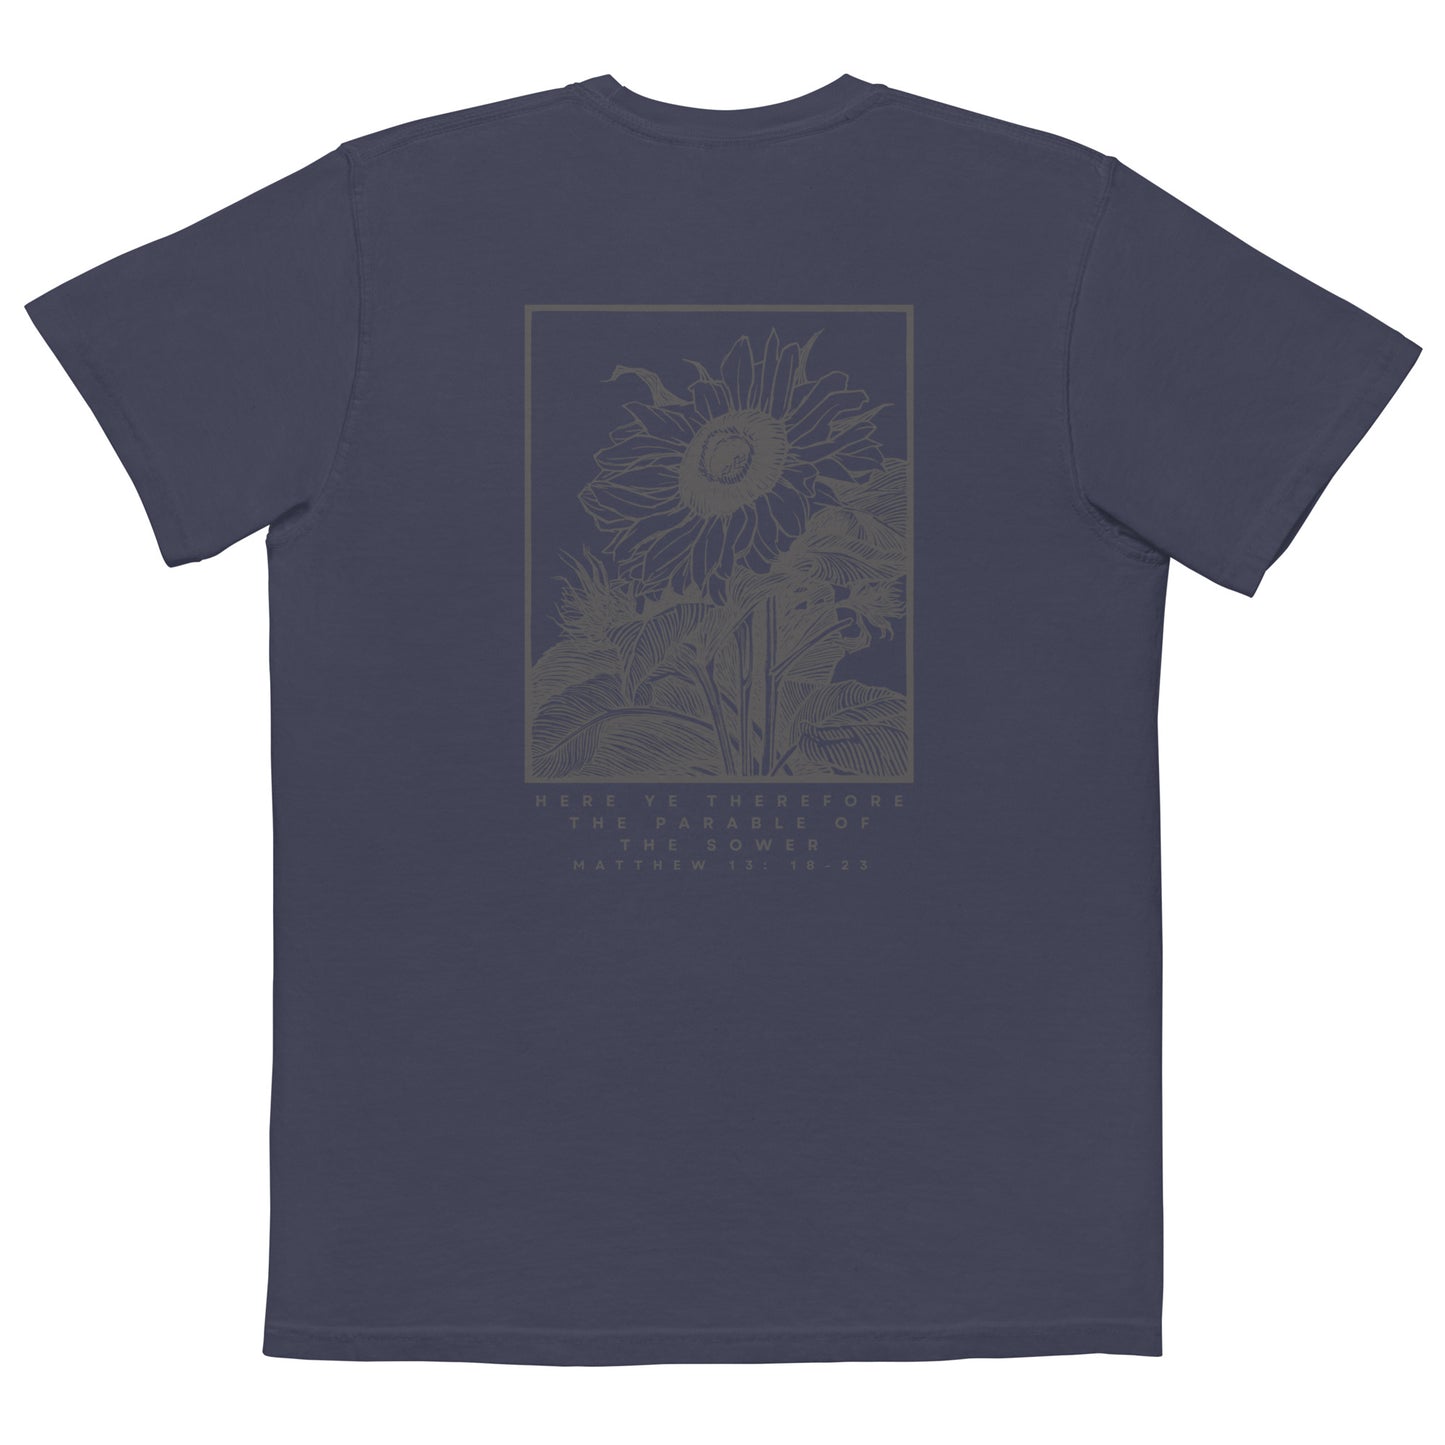 Parable Of The Sower Unisex garment-dyed pocket t-shirt